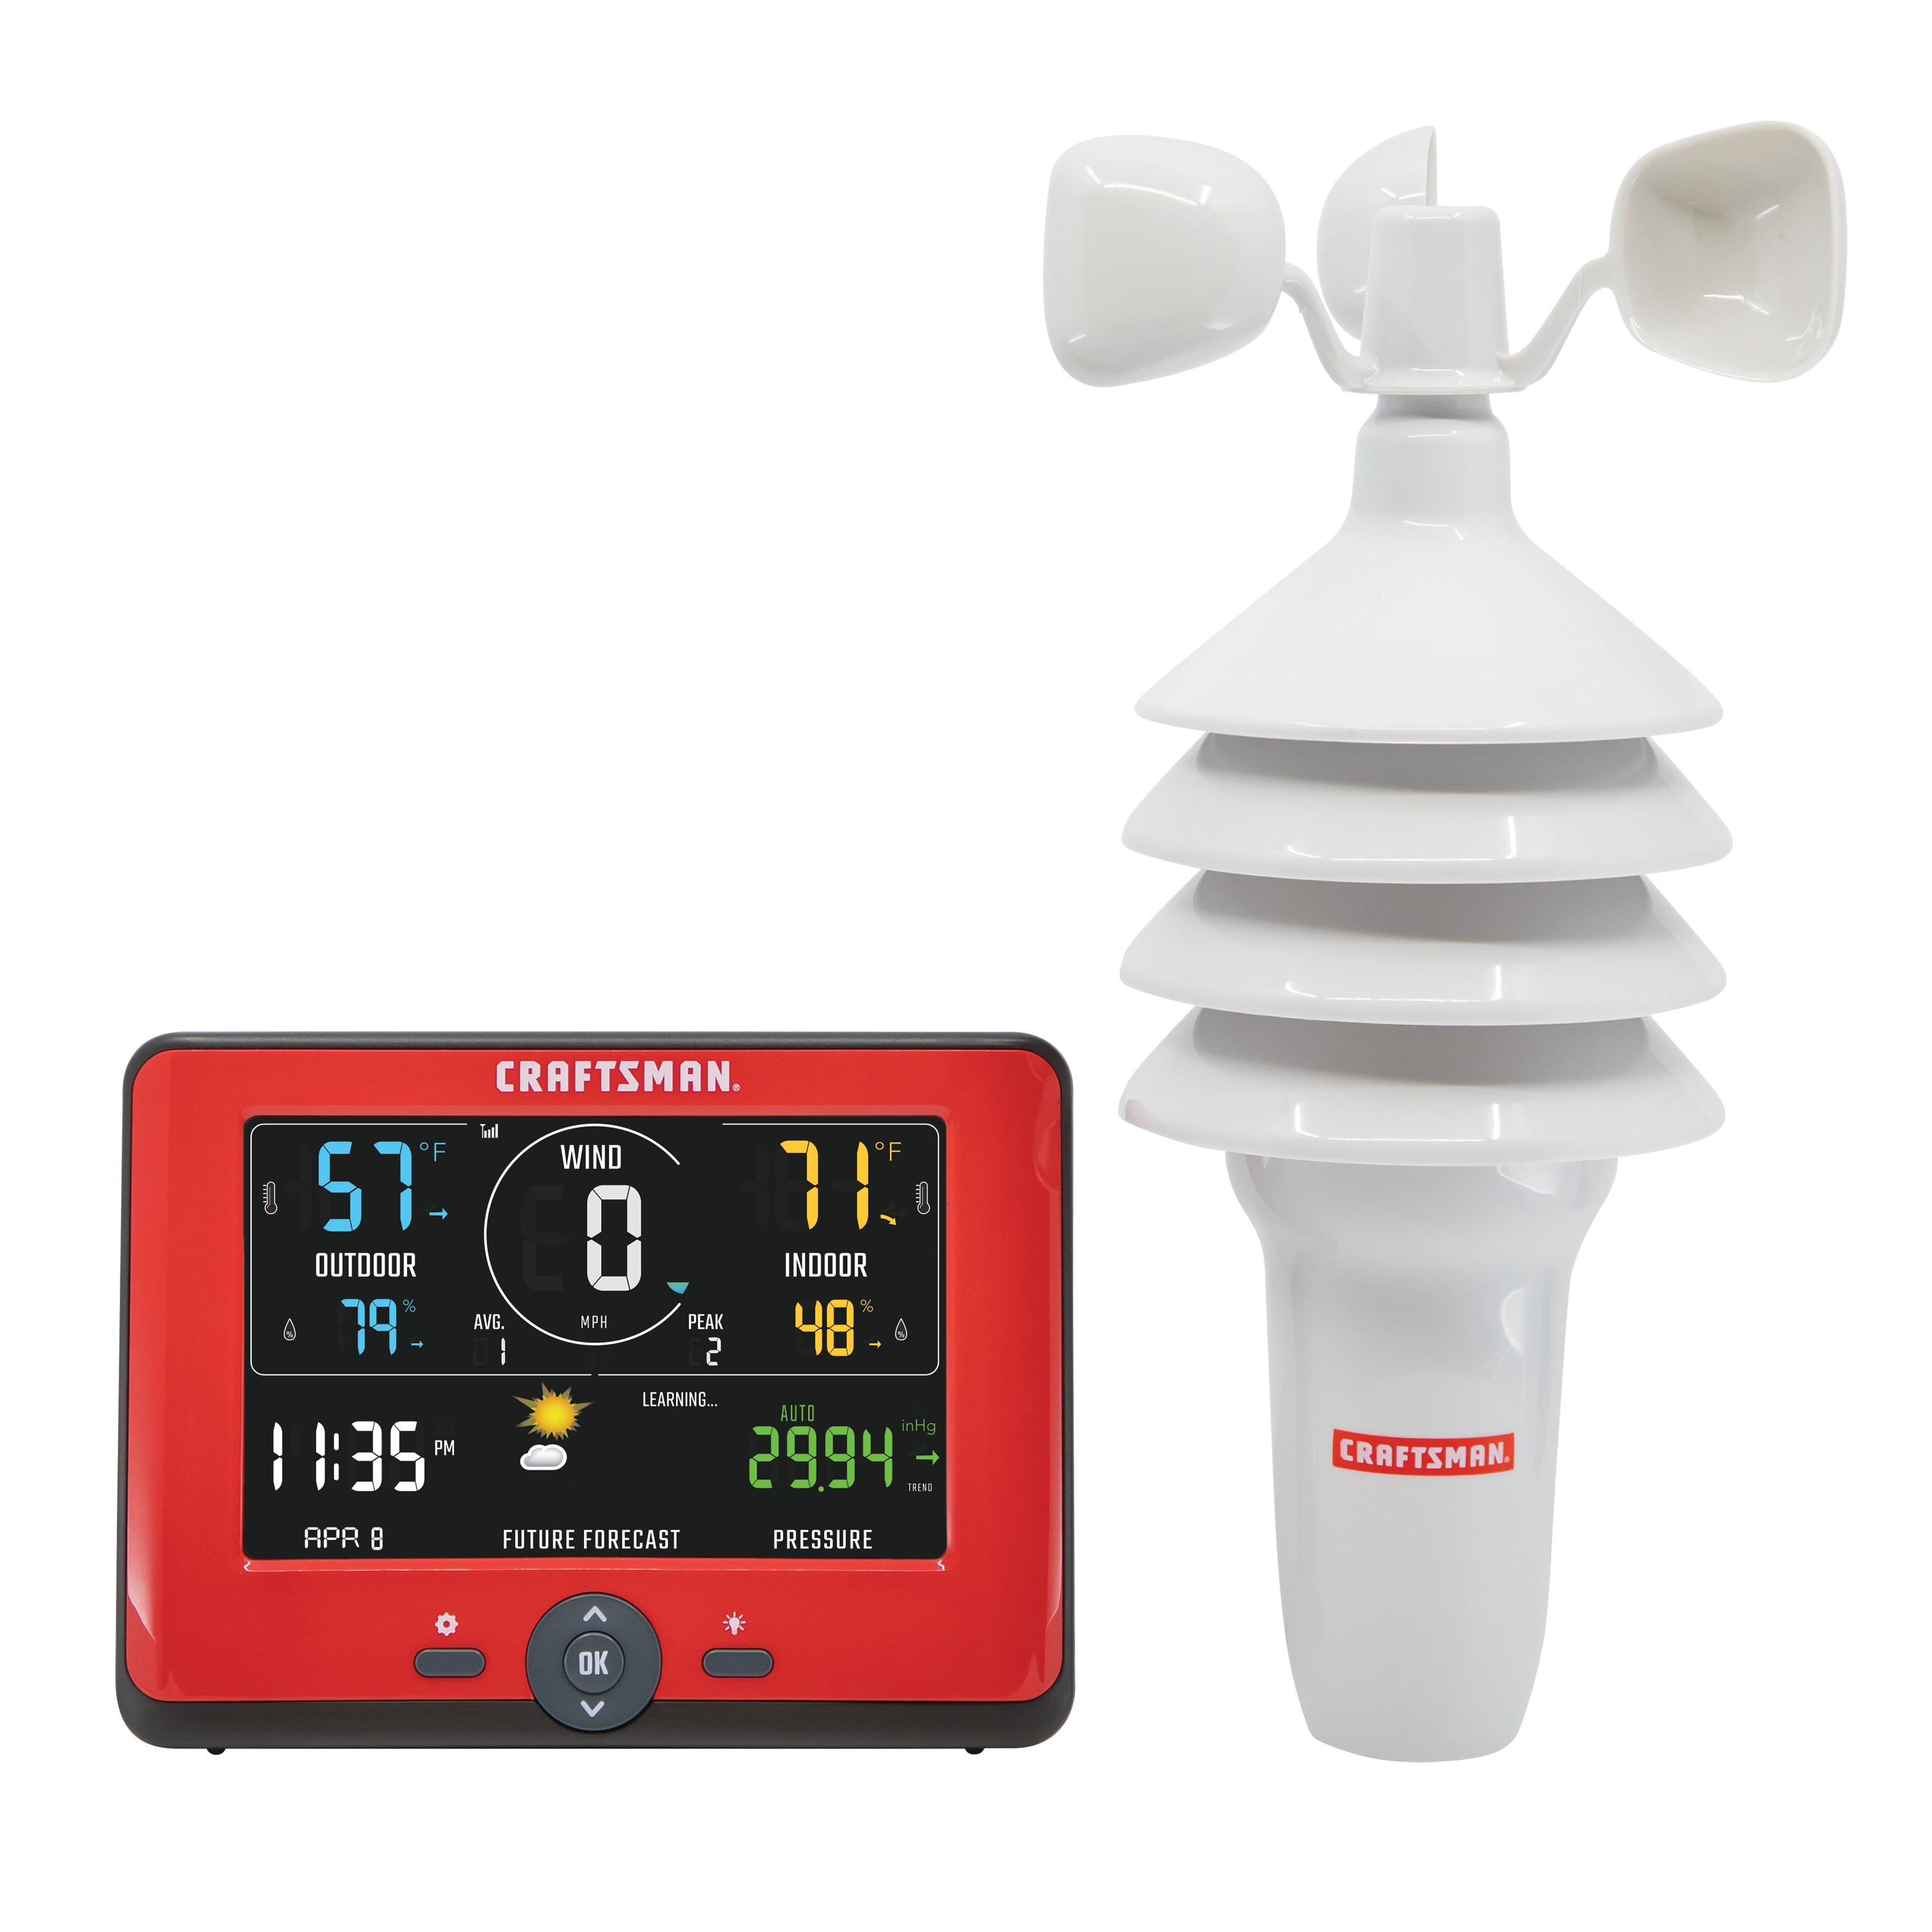 Indoor/outdoor weather station, color led display, Weather stations, Electronic gifts